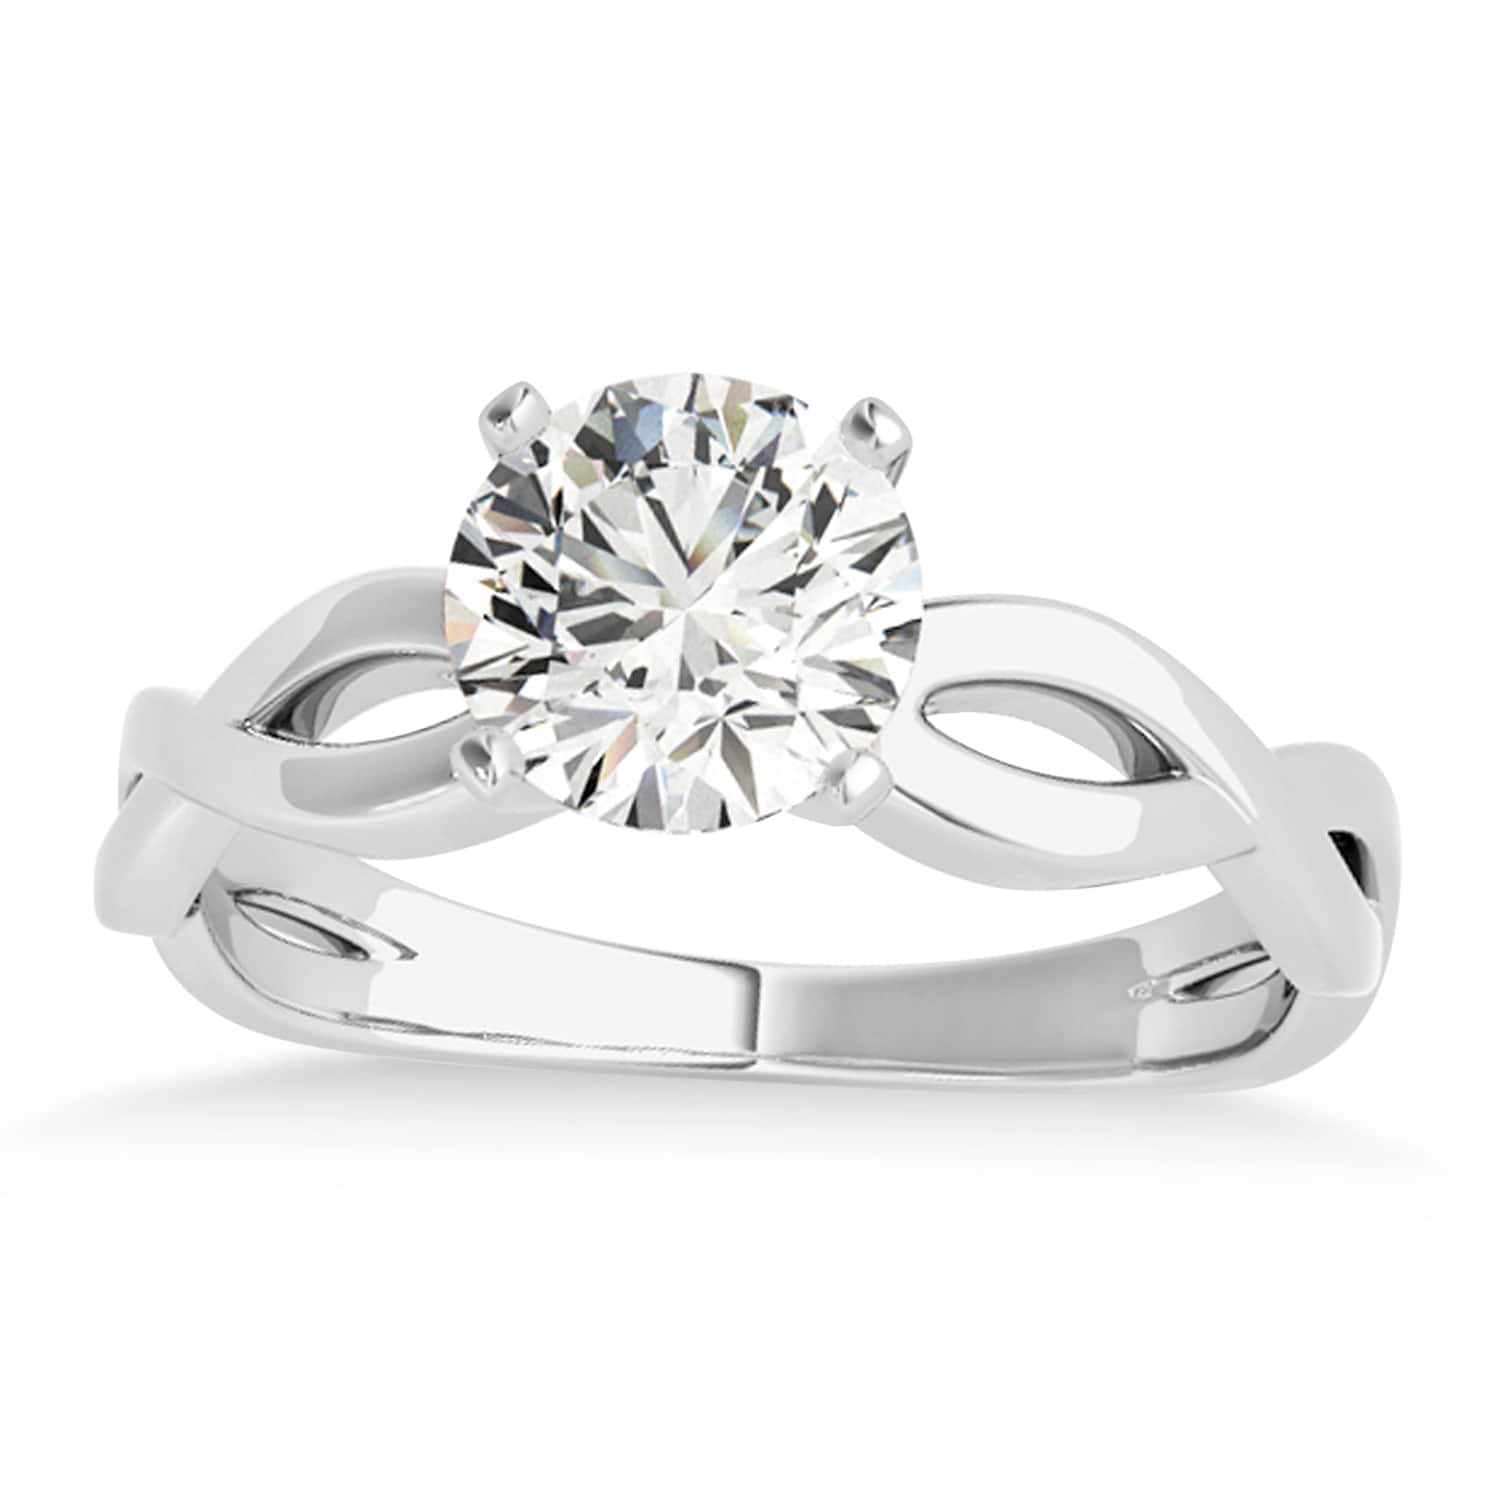 Diamond Twisted Shank Engagement Ring in 14k White Gold